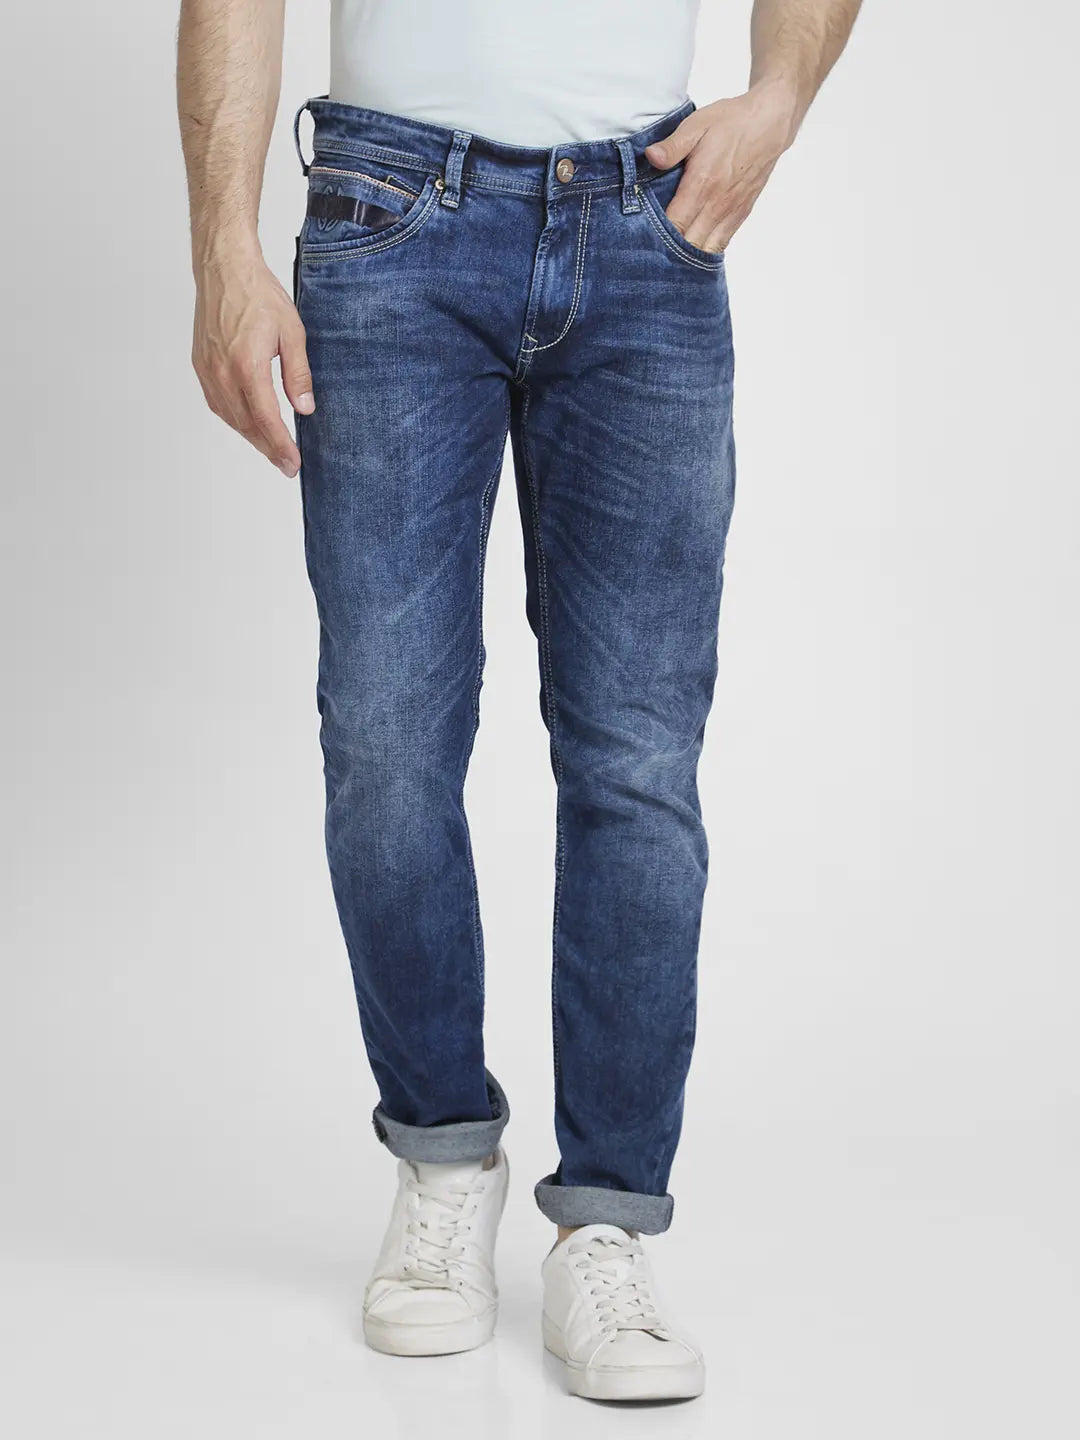 Vapor Stacked Jeans | Jeans outfit men, Slim fit ripped jeans, Mens street  style casual